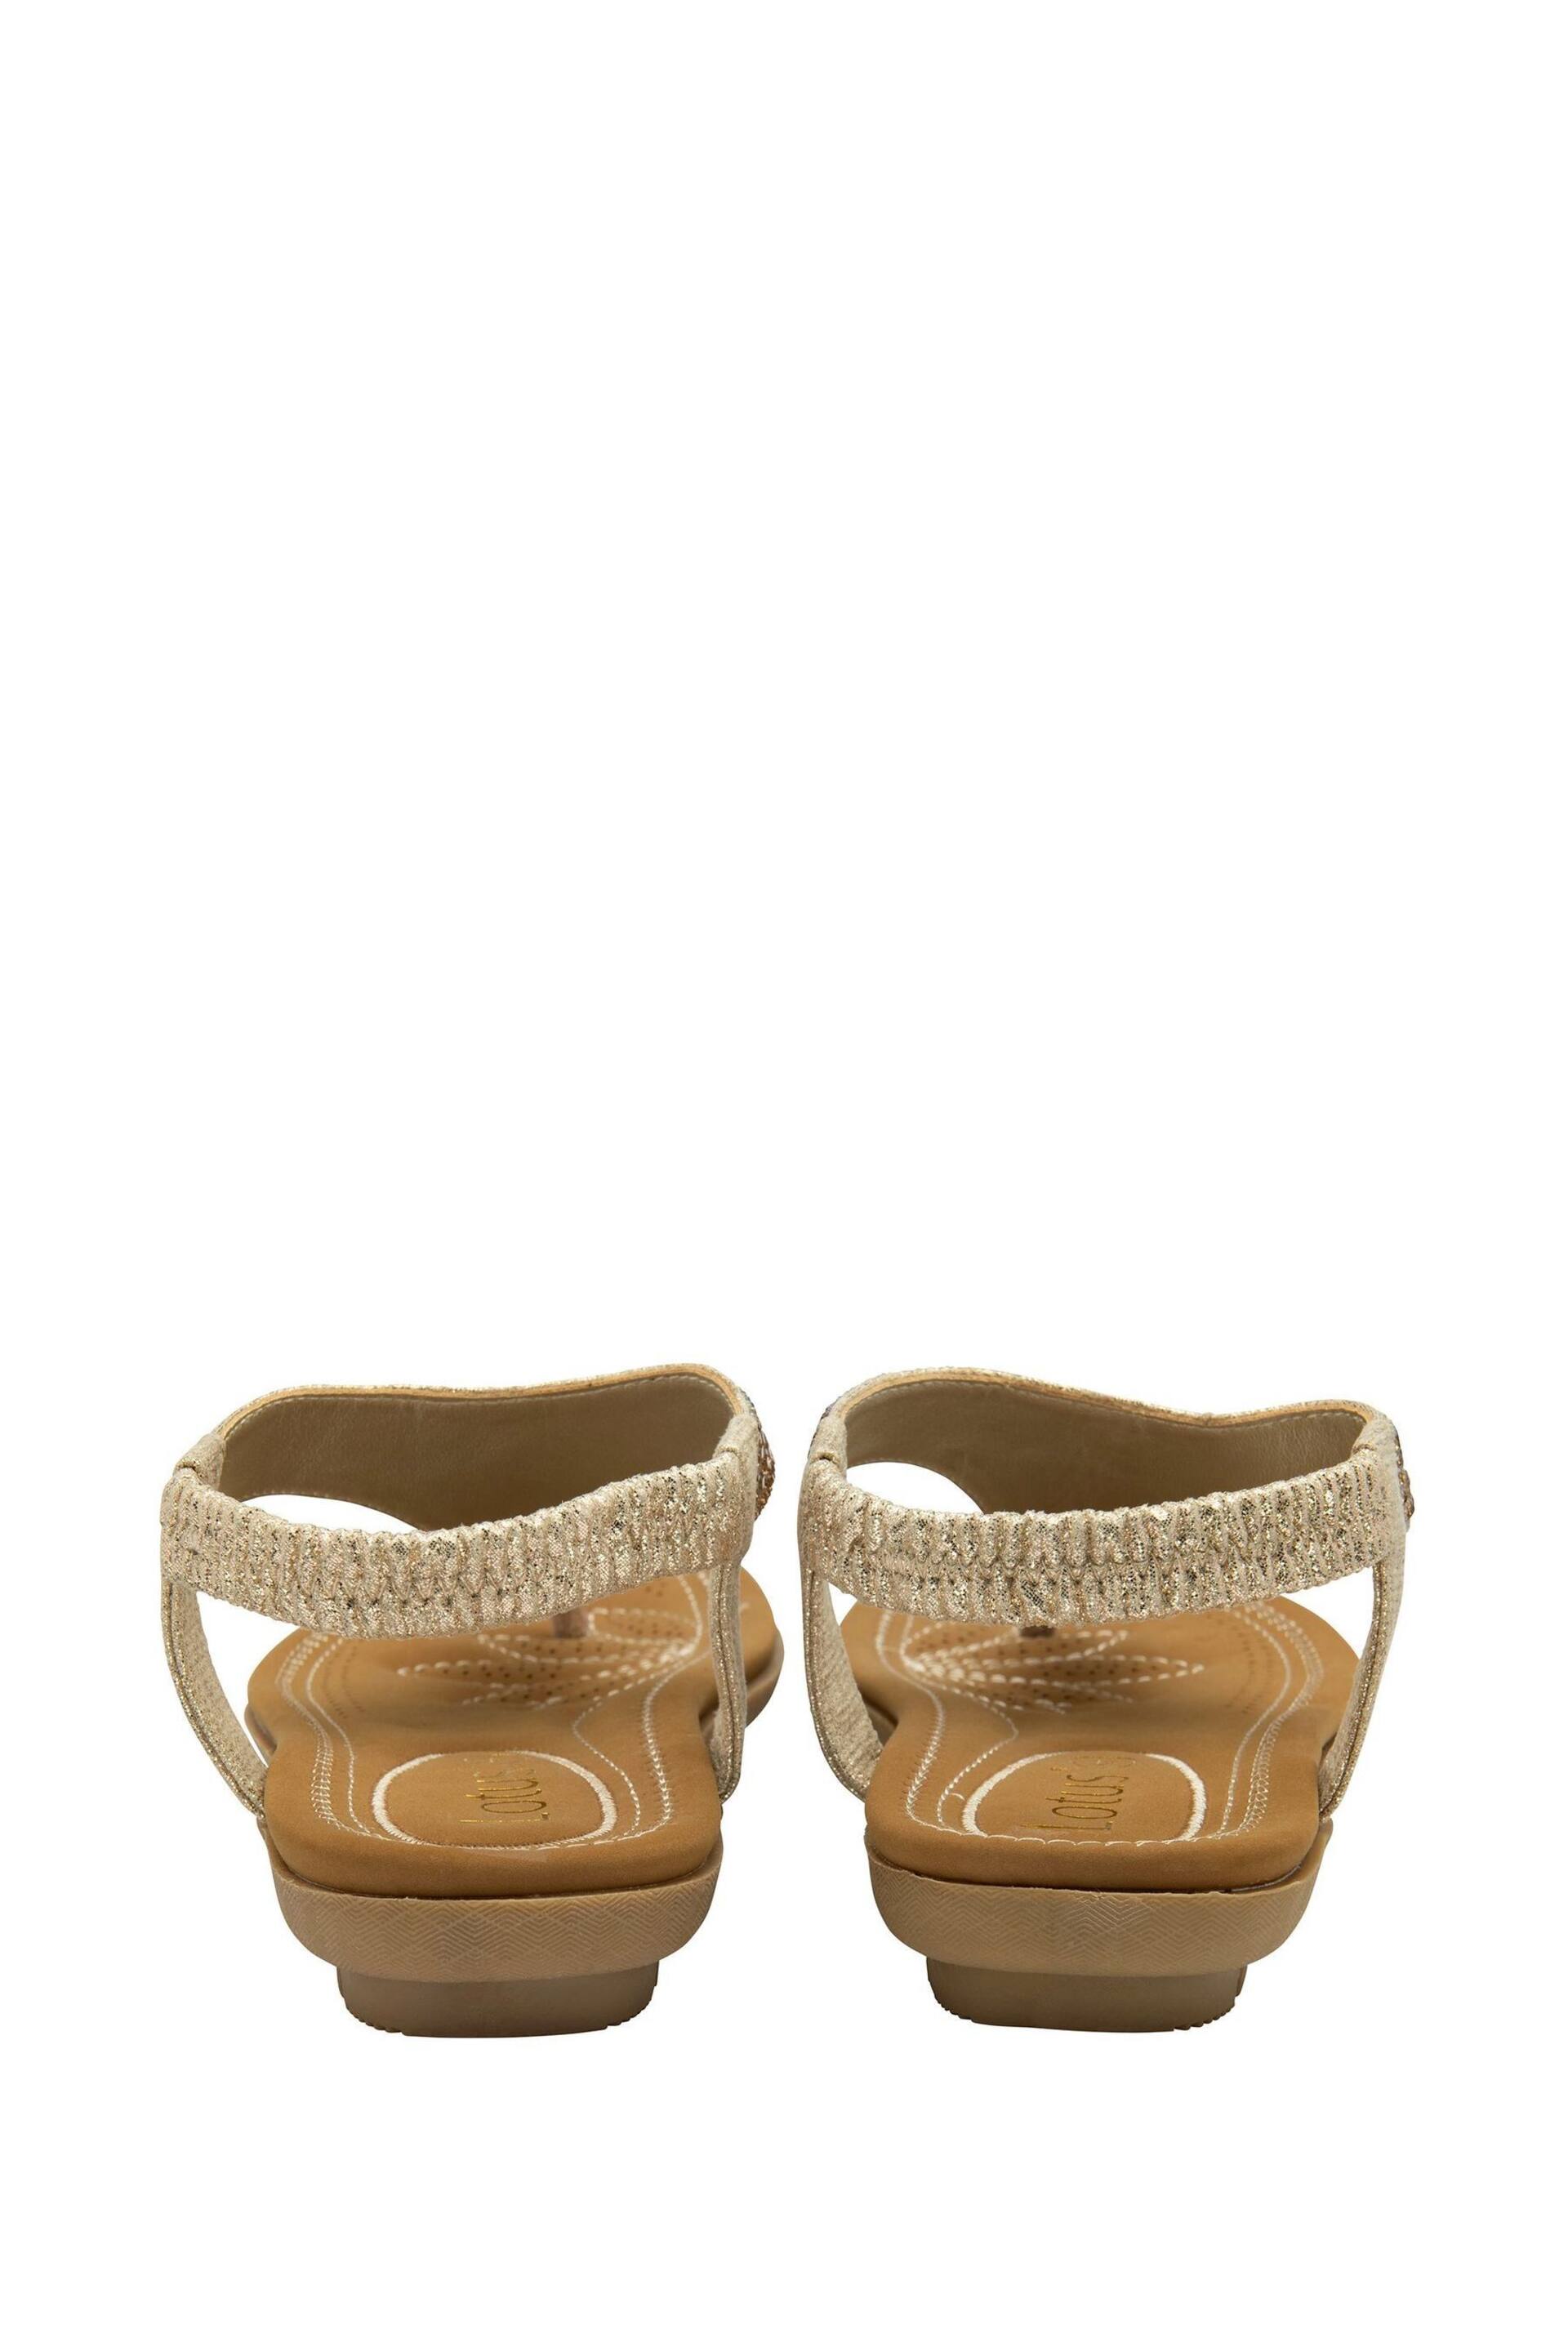 Lotus Gold Toe-Post Sandals - Image 3 of 3